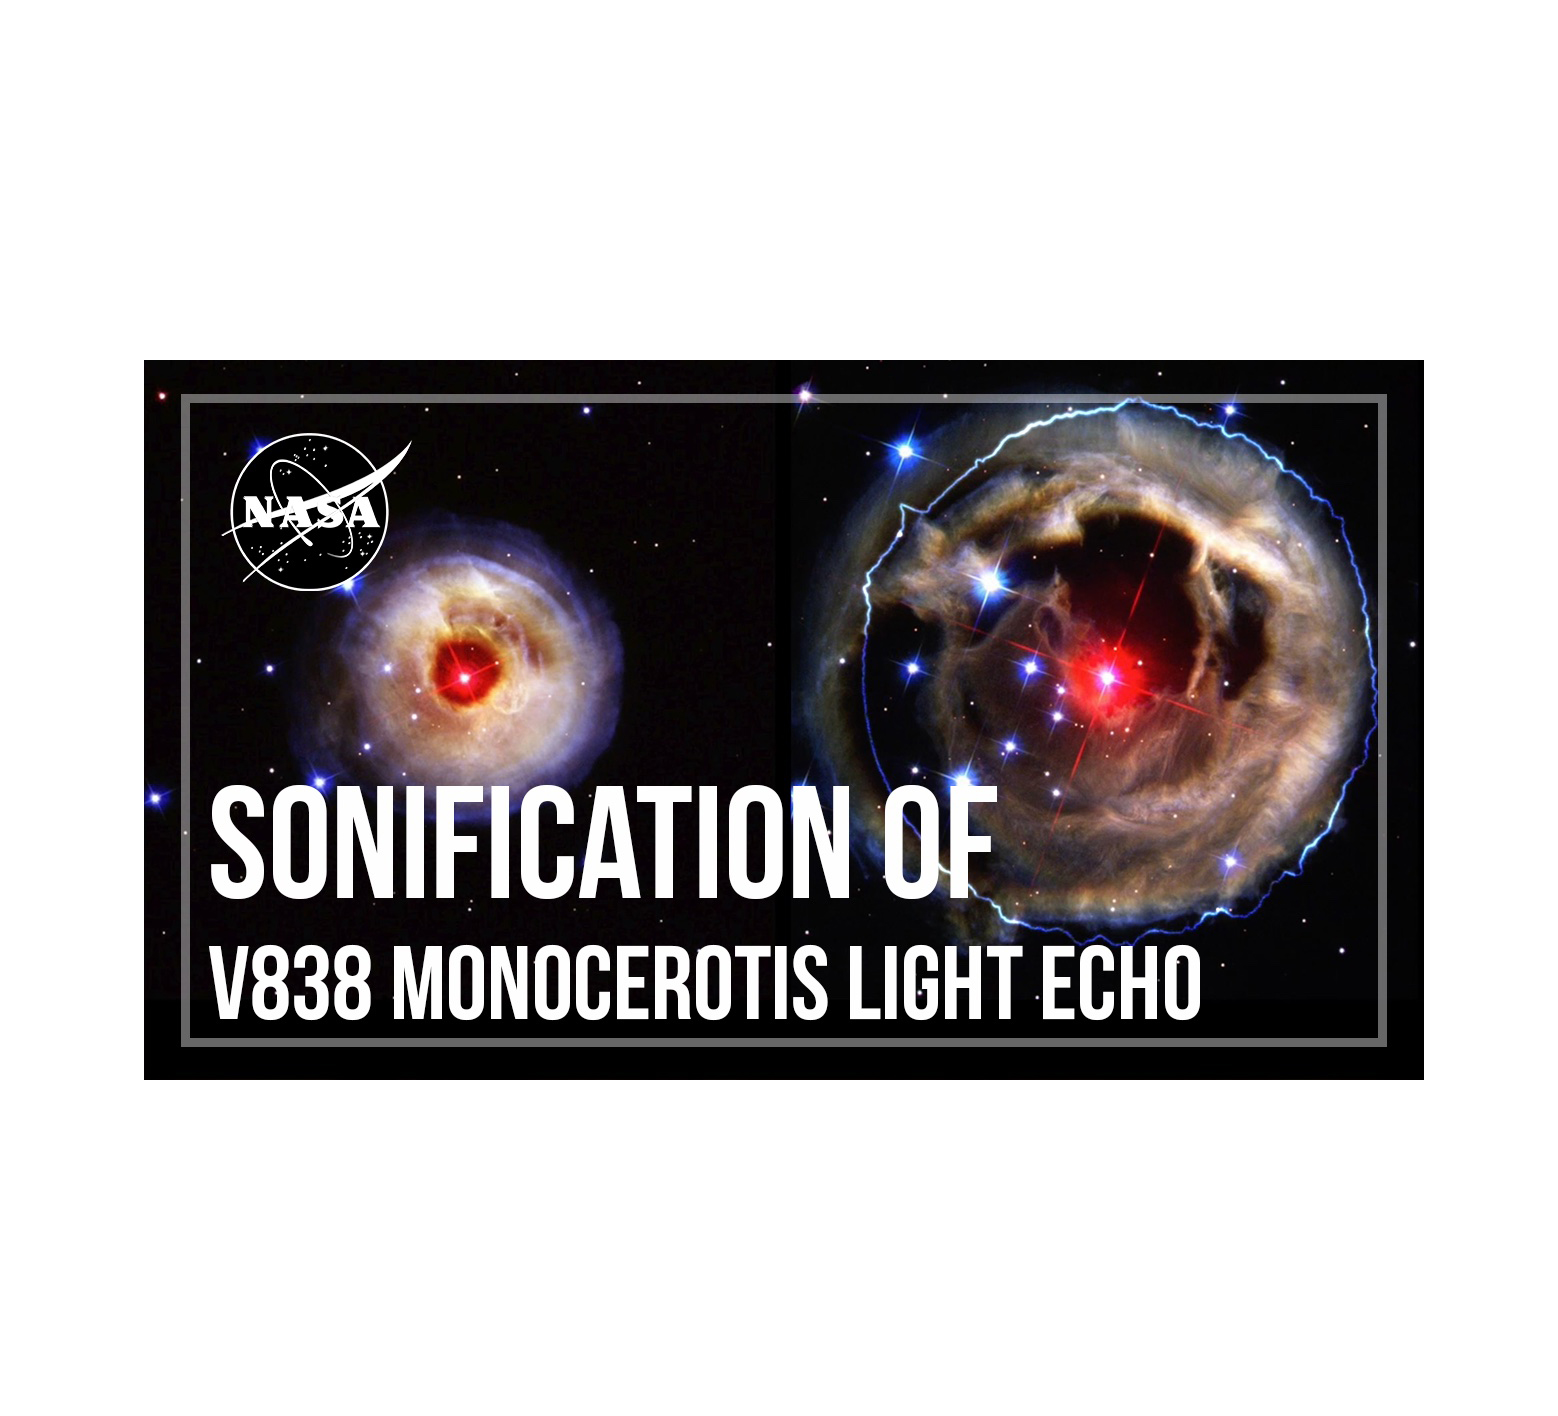 Two images of V838 Monocerotis. The left image of this light echo appears as a ball of gas and dust with a bright star at its center. In the right image the ball of gas appears expanded and more diffuse.